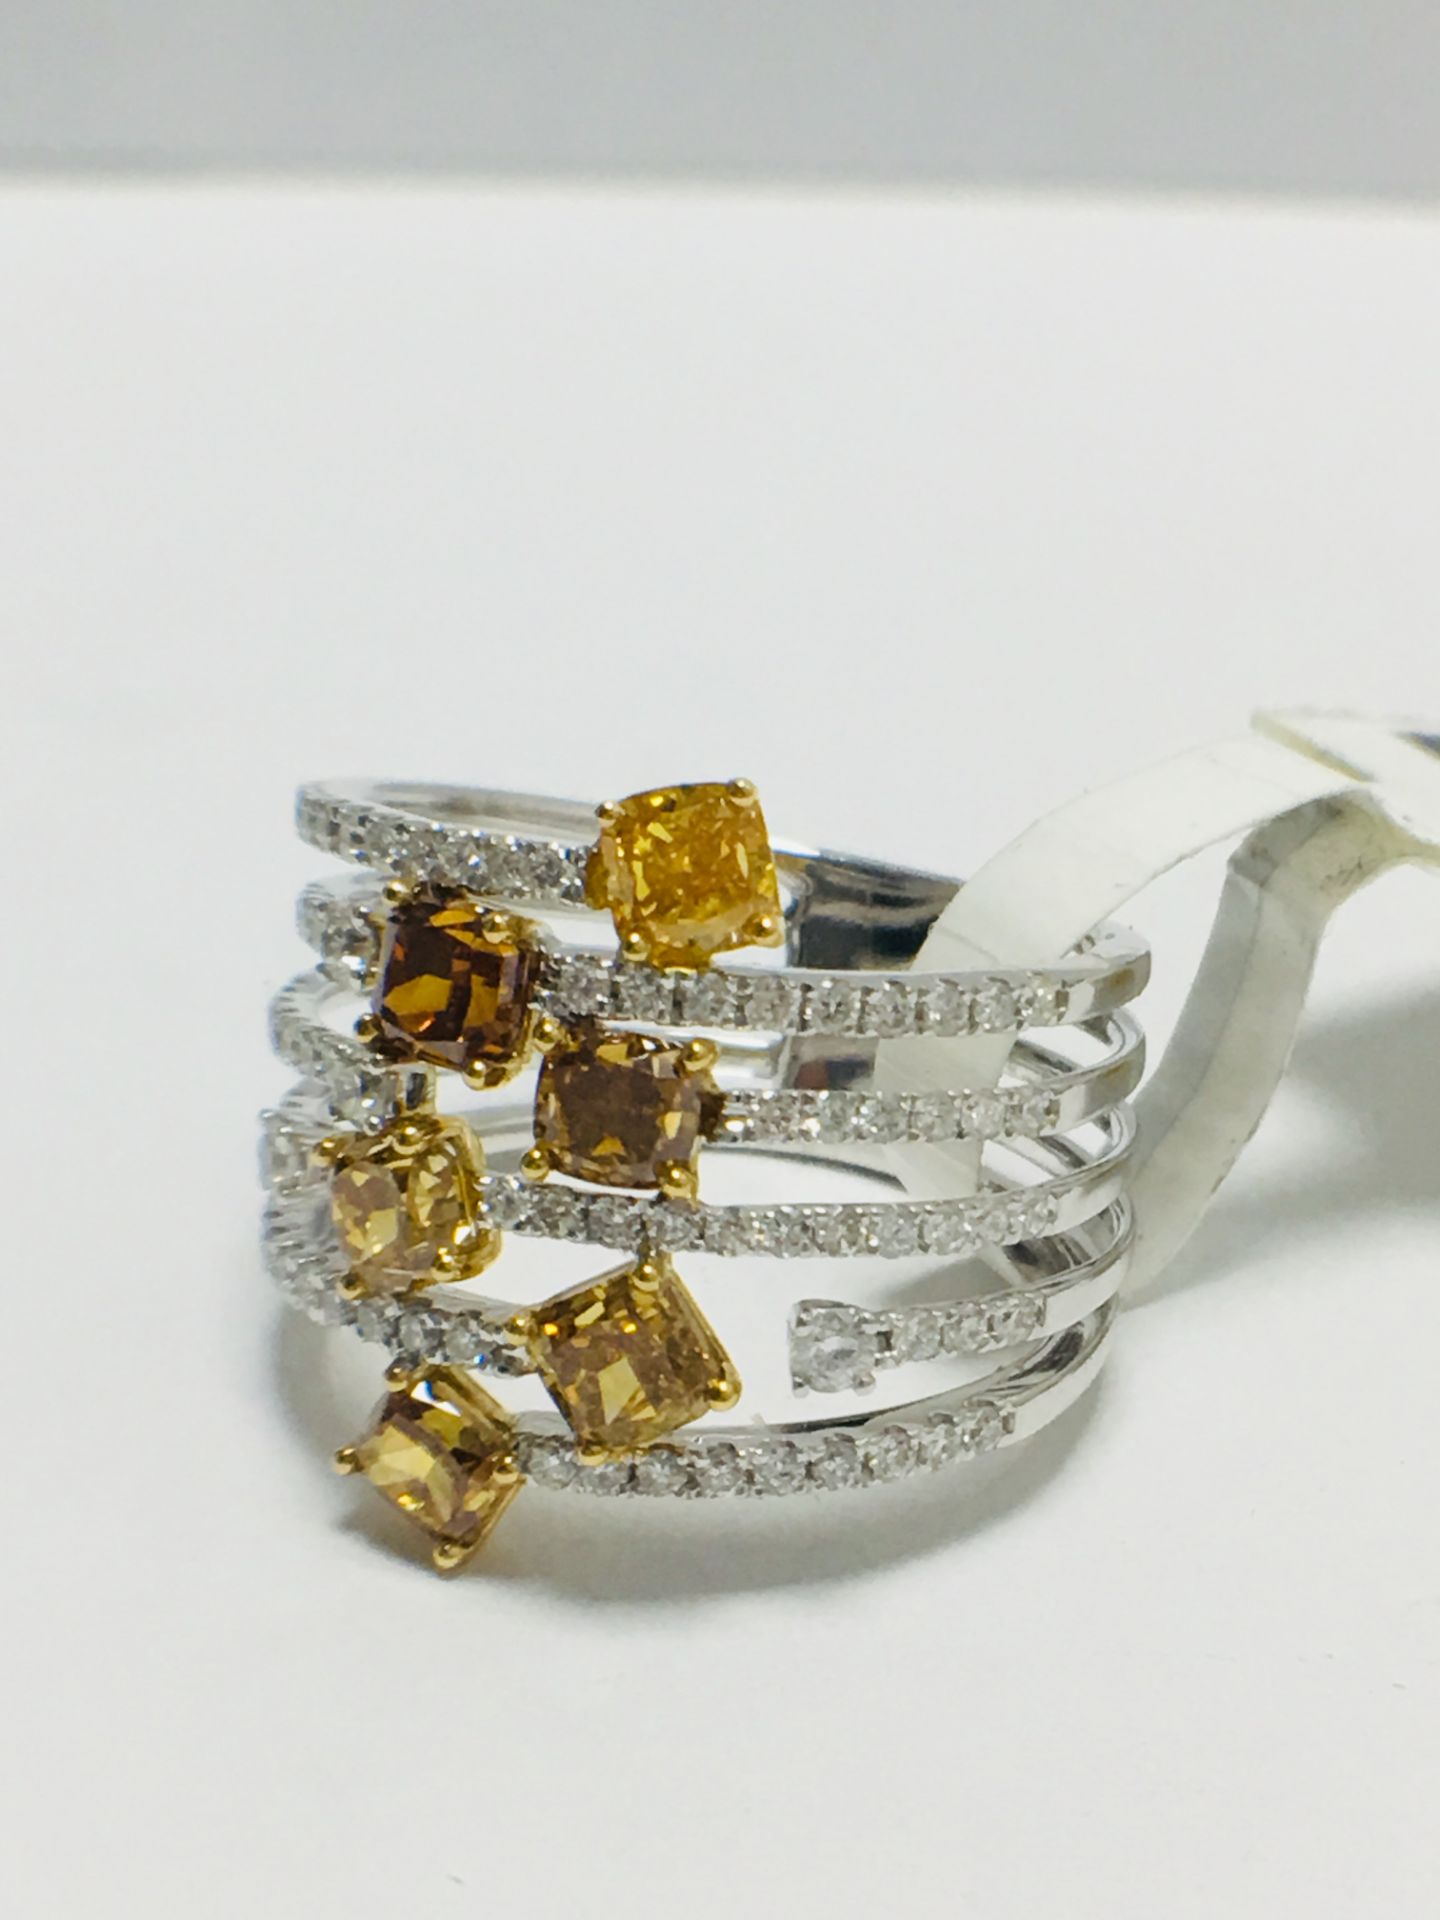 18ct Fancy Colour Diamond Ring - Image 9 of 10